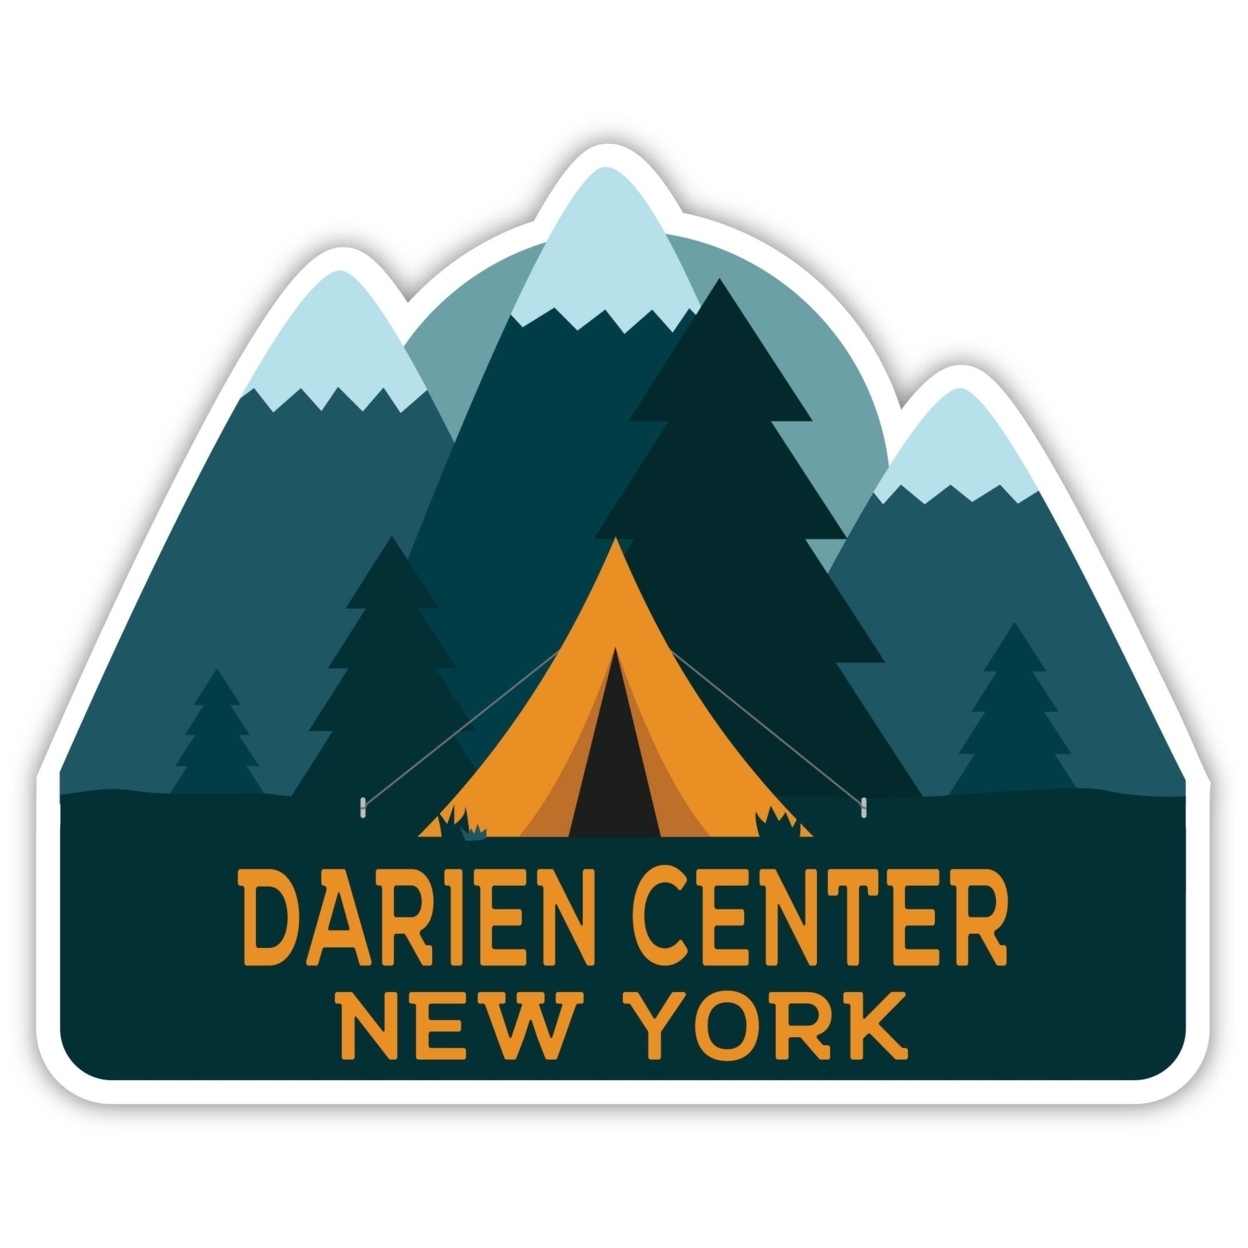 Darien Center New York Souvenir Decorative Stickers (Choose Theme And Size) - 4-Pack, 10-Inch, Tent